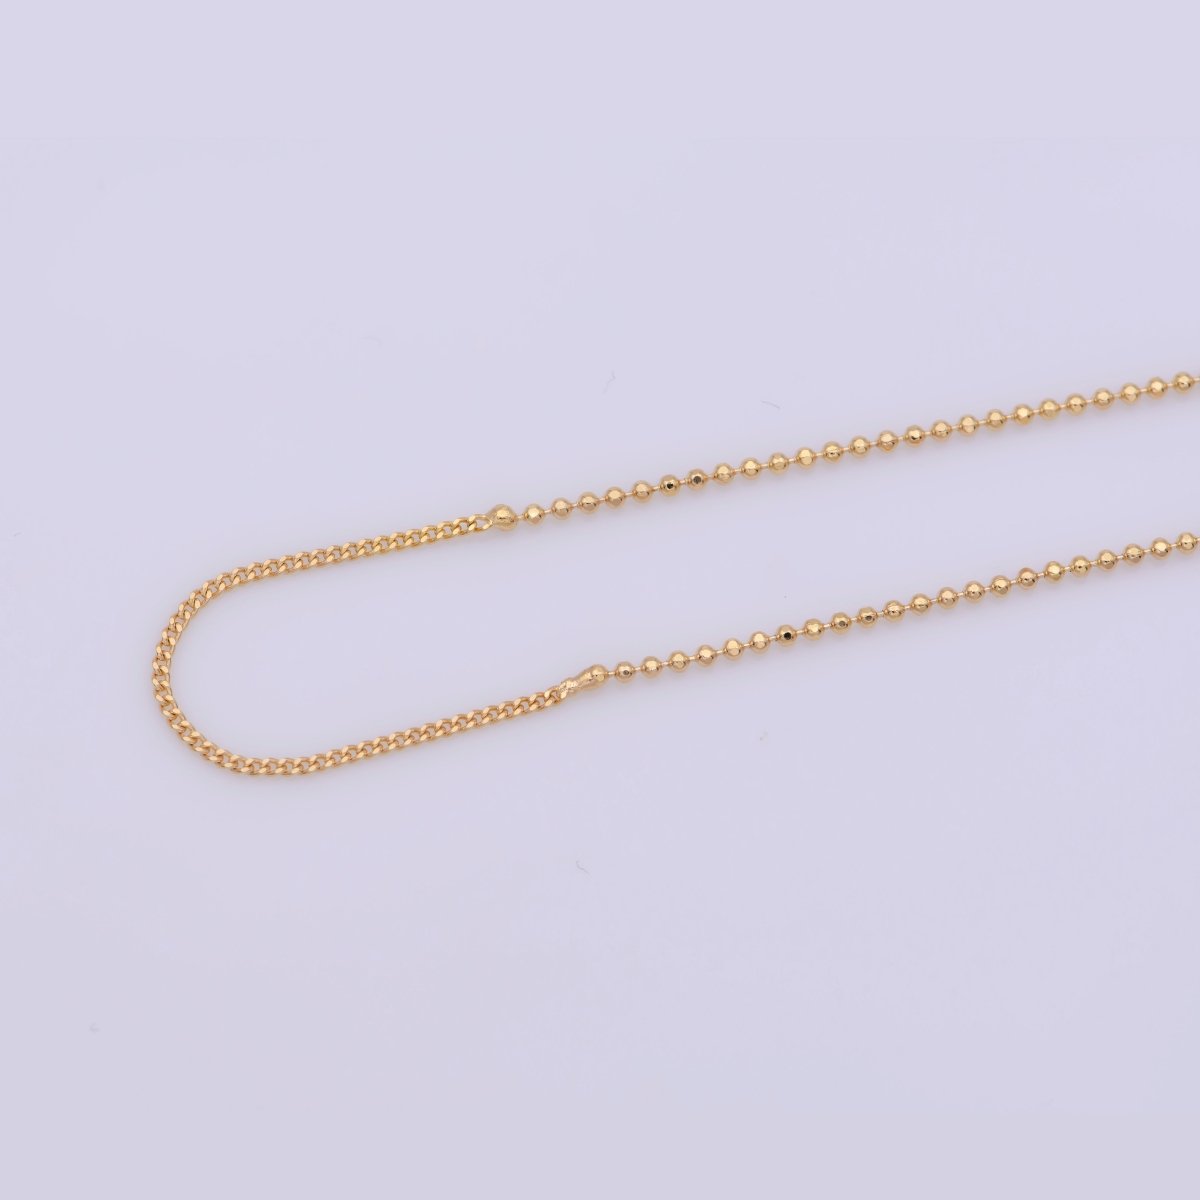 18 inches Beaded Chain Necklace, 18K Gold Plated Finished Chain Necklace, Dainty 1.2mm Bead Necklace w/ Spring Ring | CN-372 Clearance Pricing - DLUXCA